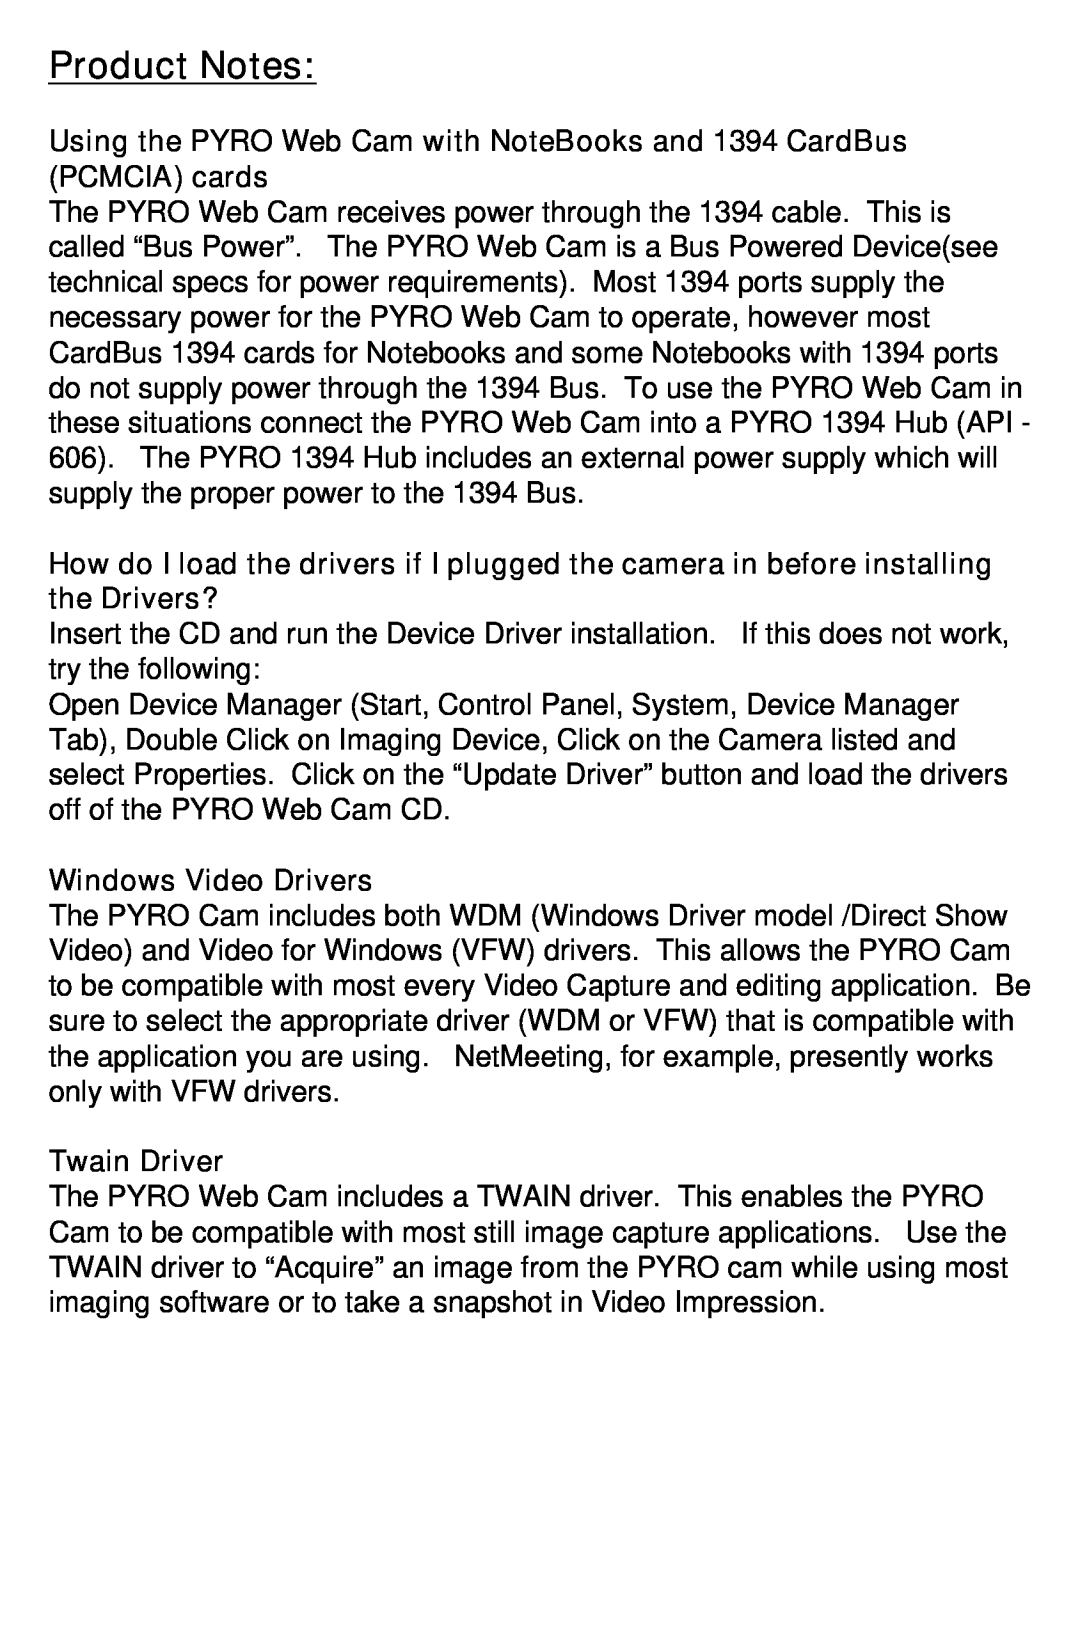 ADS Technologies manual Product Notes, Using the PYRO Web Cam with NoteBooks and 1394 CardBus PCMCIA cards, Twain Driver 